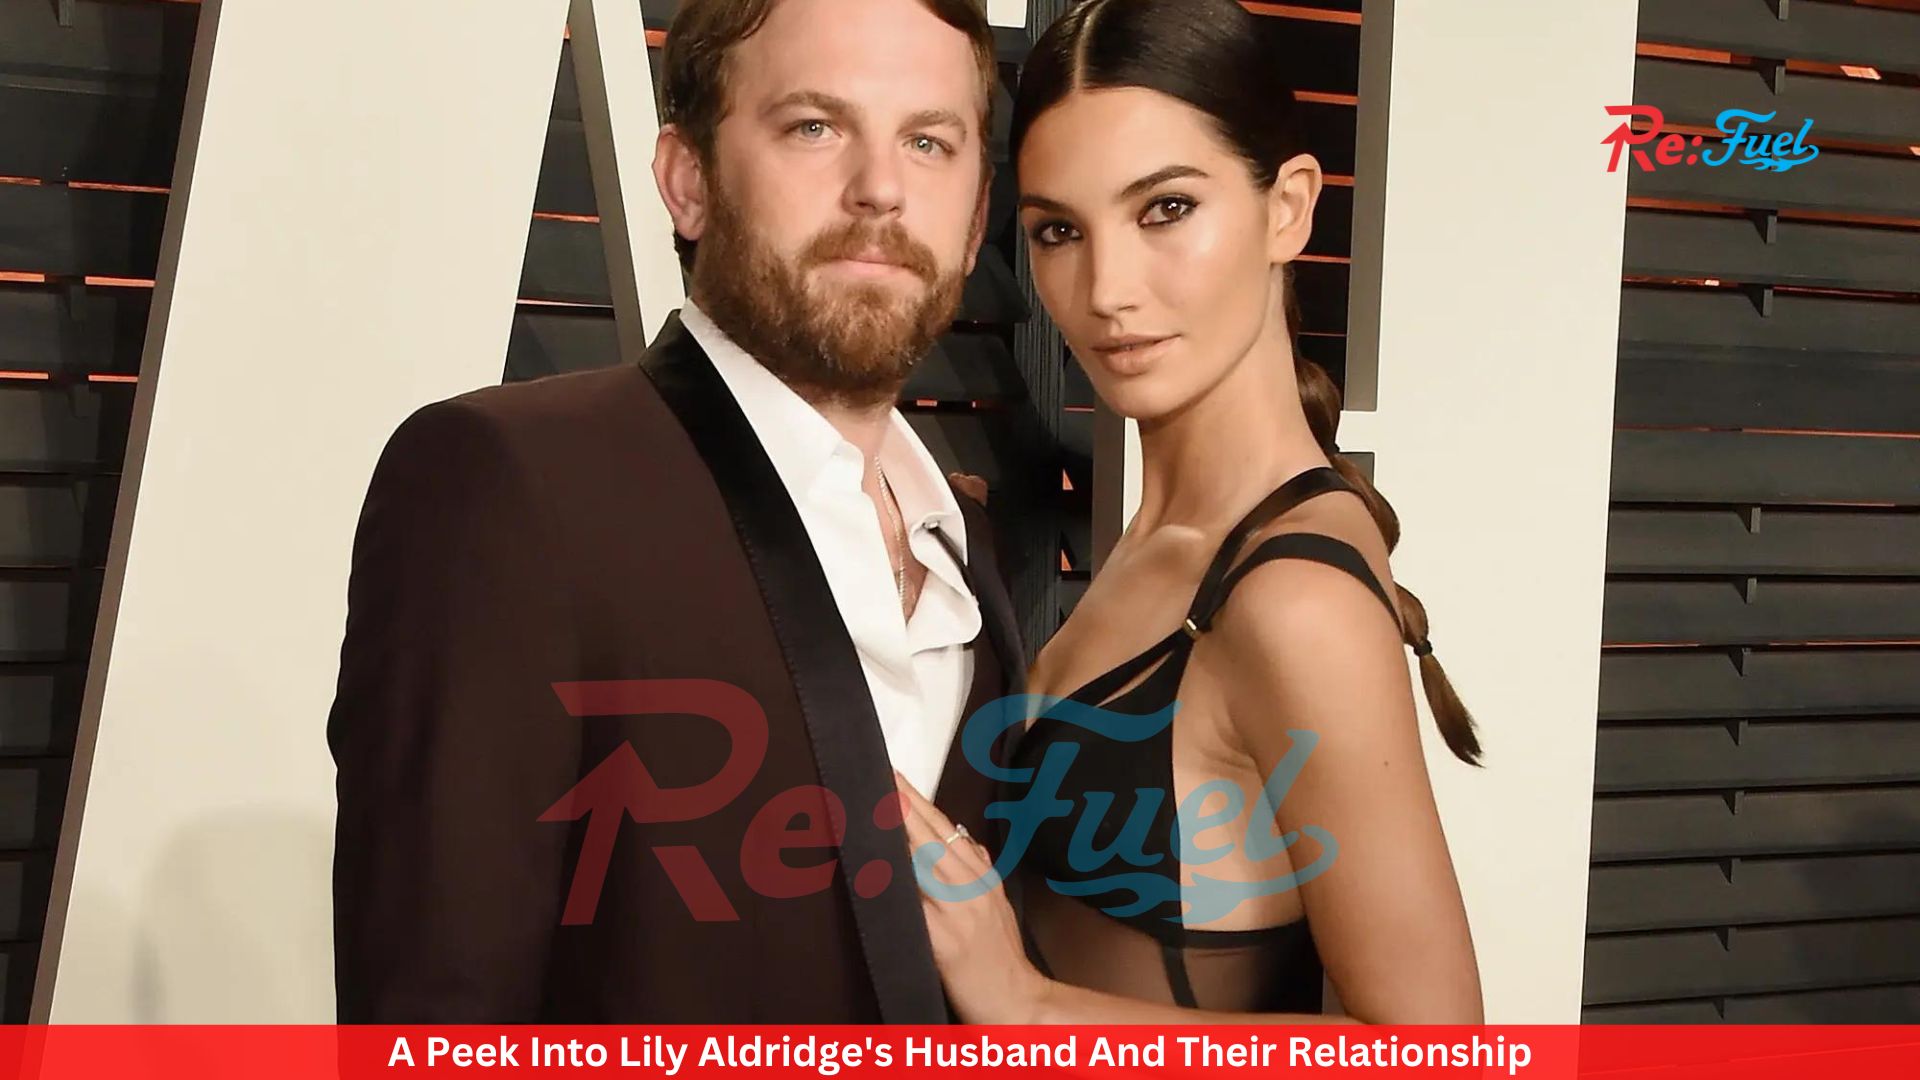 A Peek Into Lily Aldridge's Husband And Their Relationship